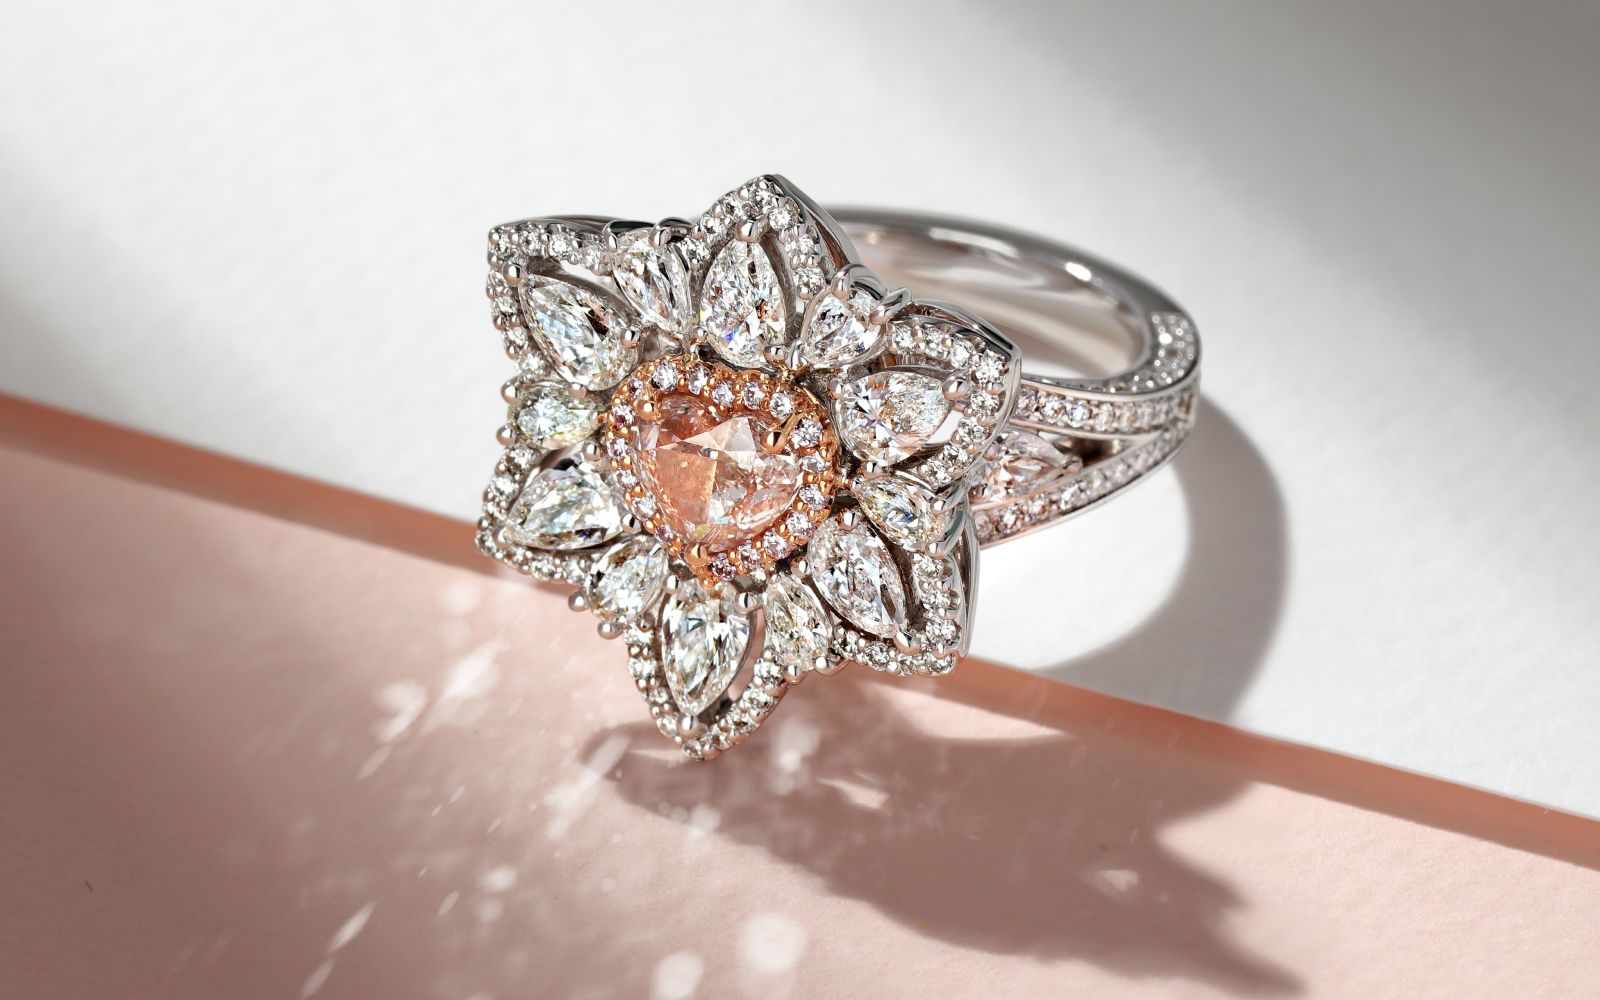 Parure Atelier High Jewellery ring featuring a Fancy Light Pinkish Brown diamond and colourless diamonds